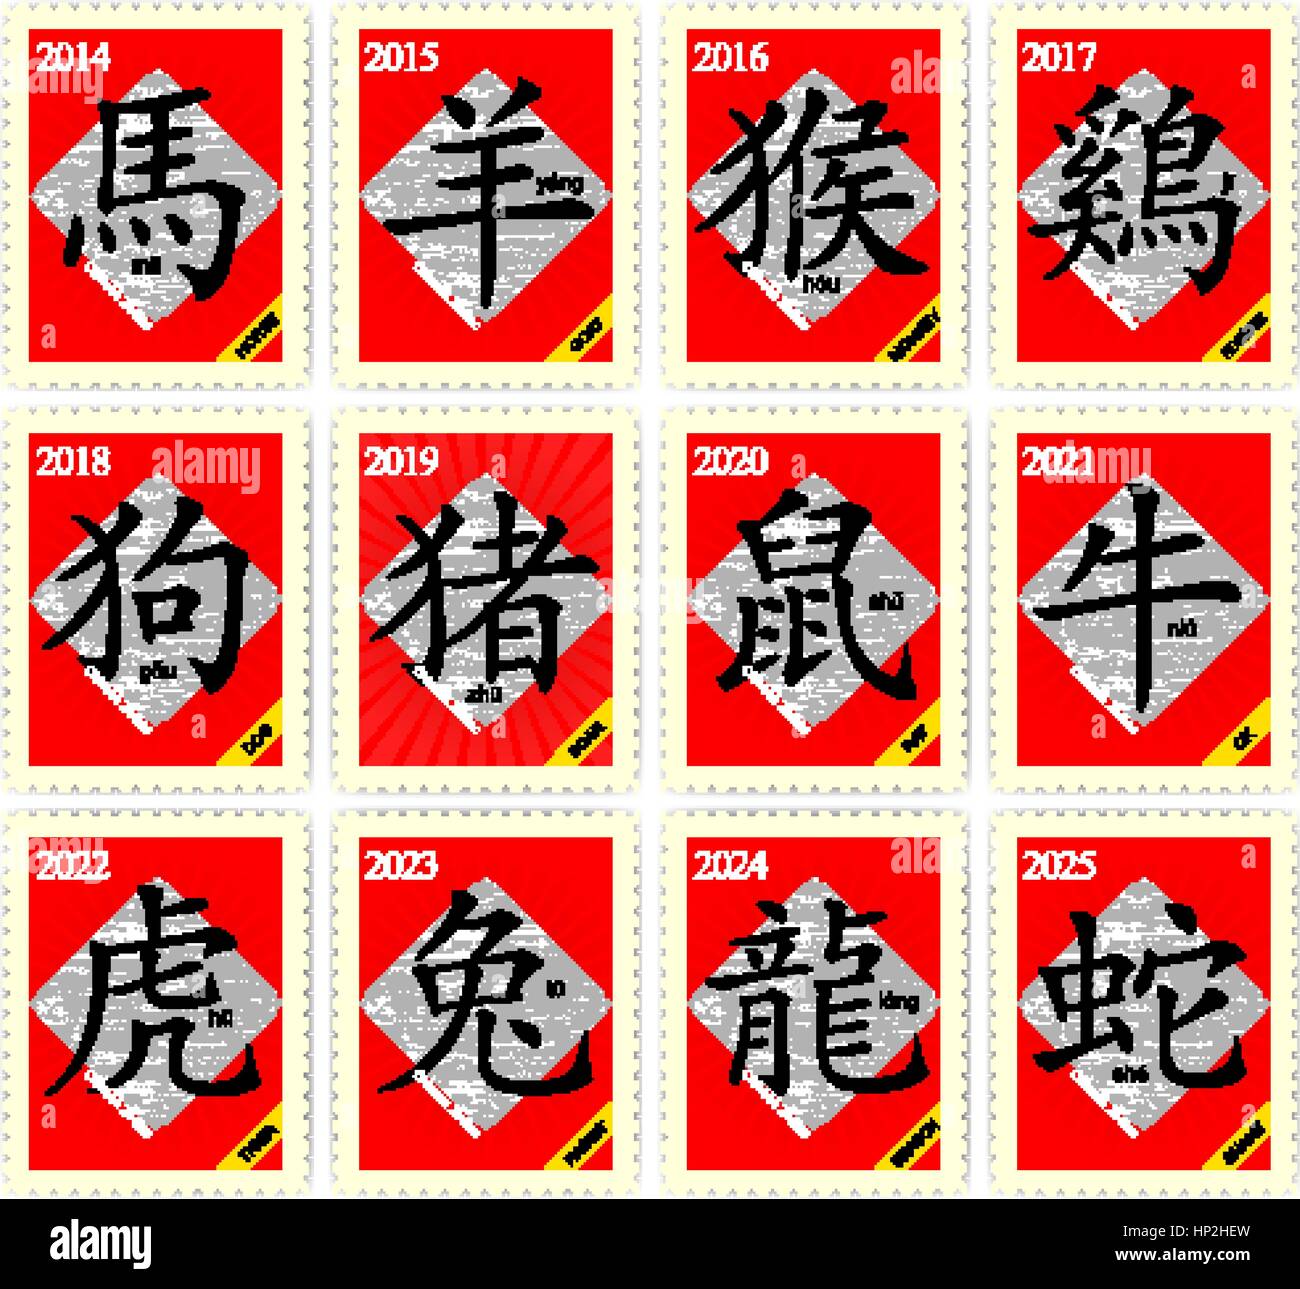 12 Chinese Zodiac Signs High-Res Vector Graphic - Getty Images